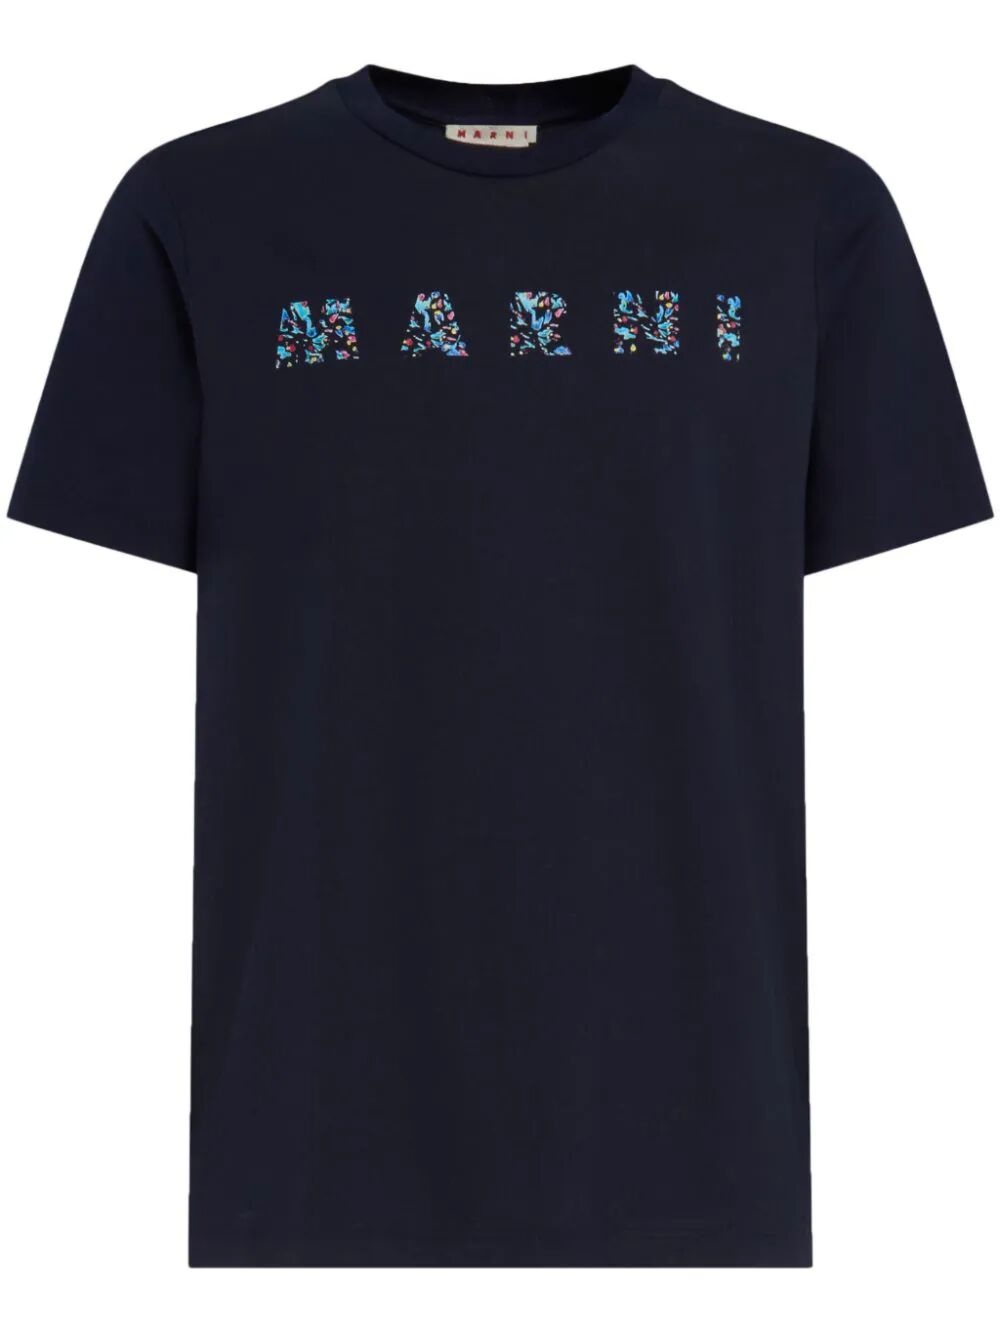 T-shirt with patterned marni print - 1